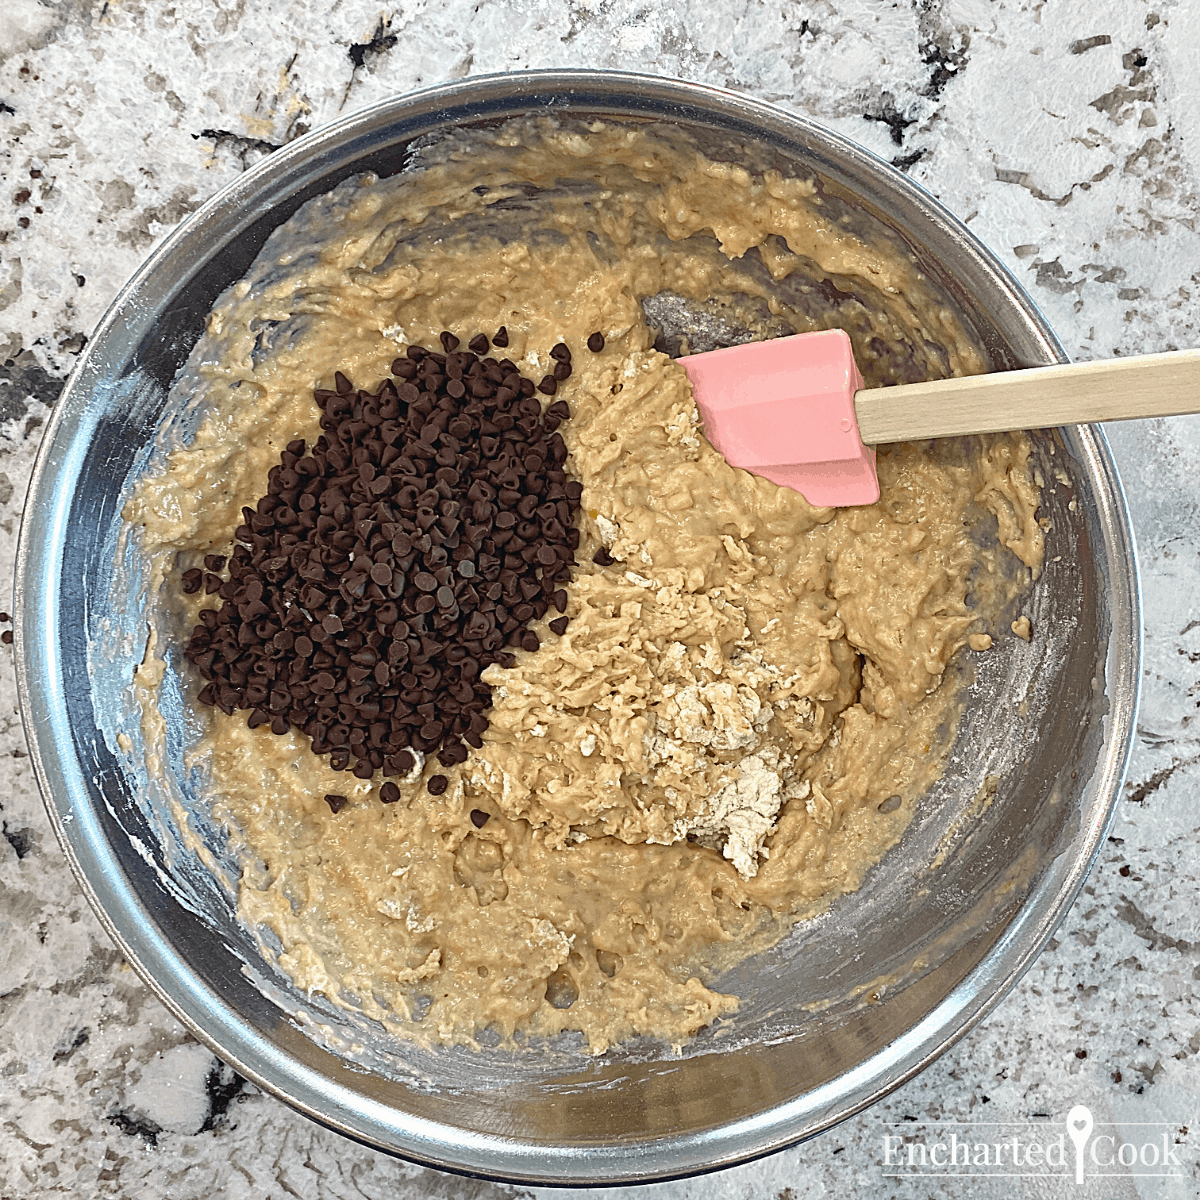 The flour has been folded into the batter and mini chocolate chips are ready to be folded into the batter with a rubber spatula.